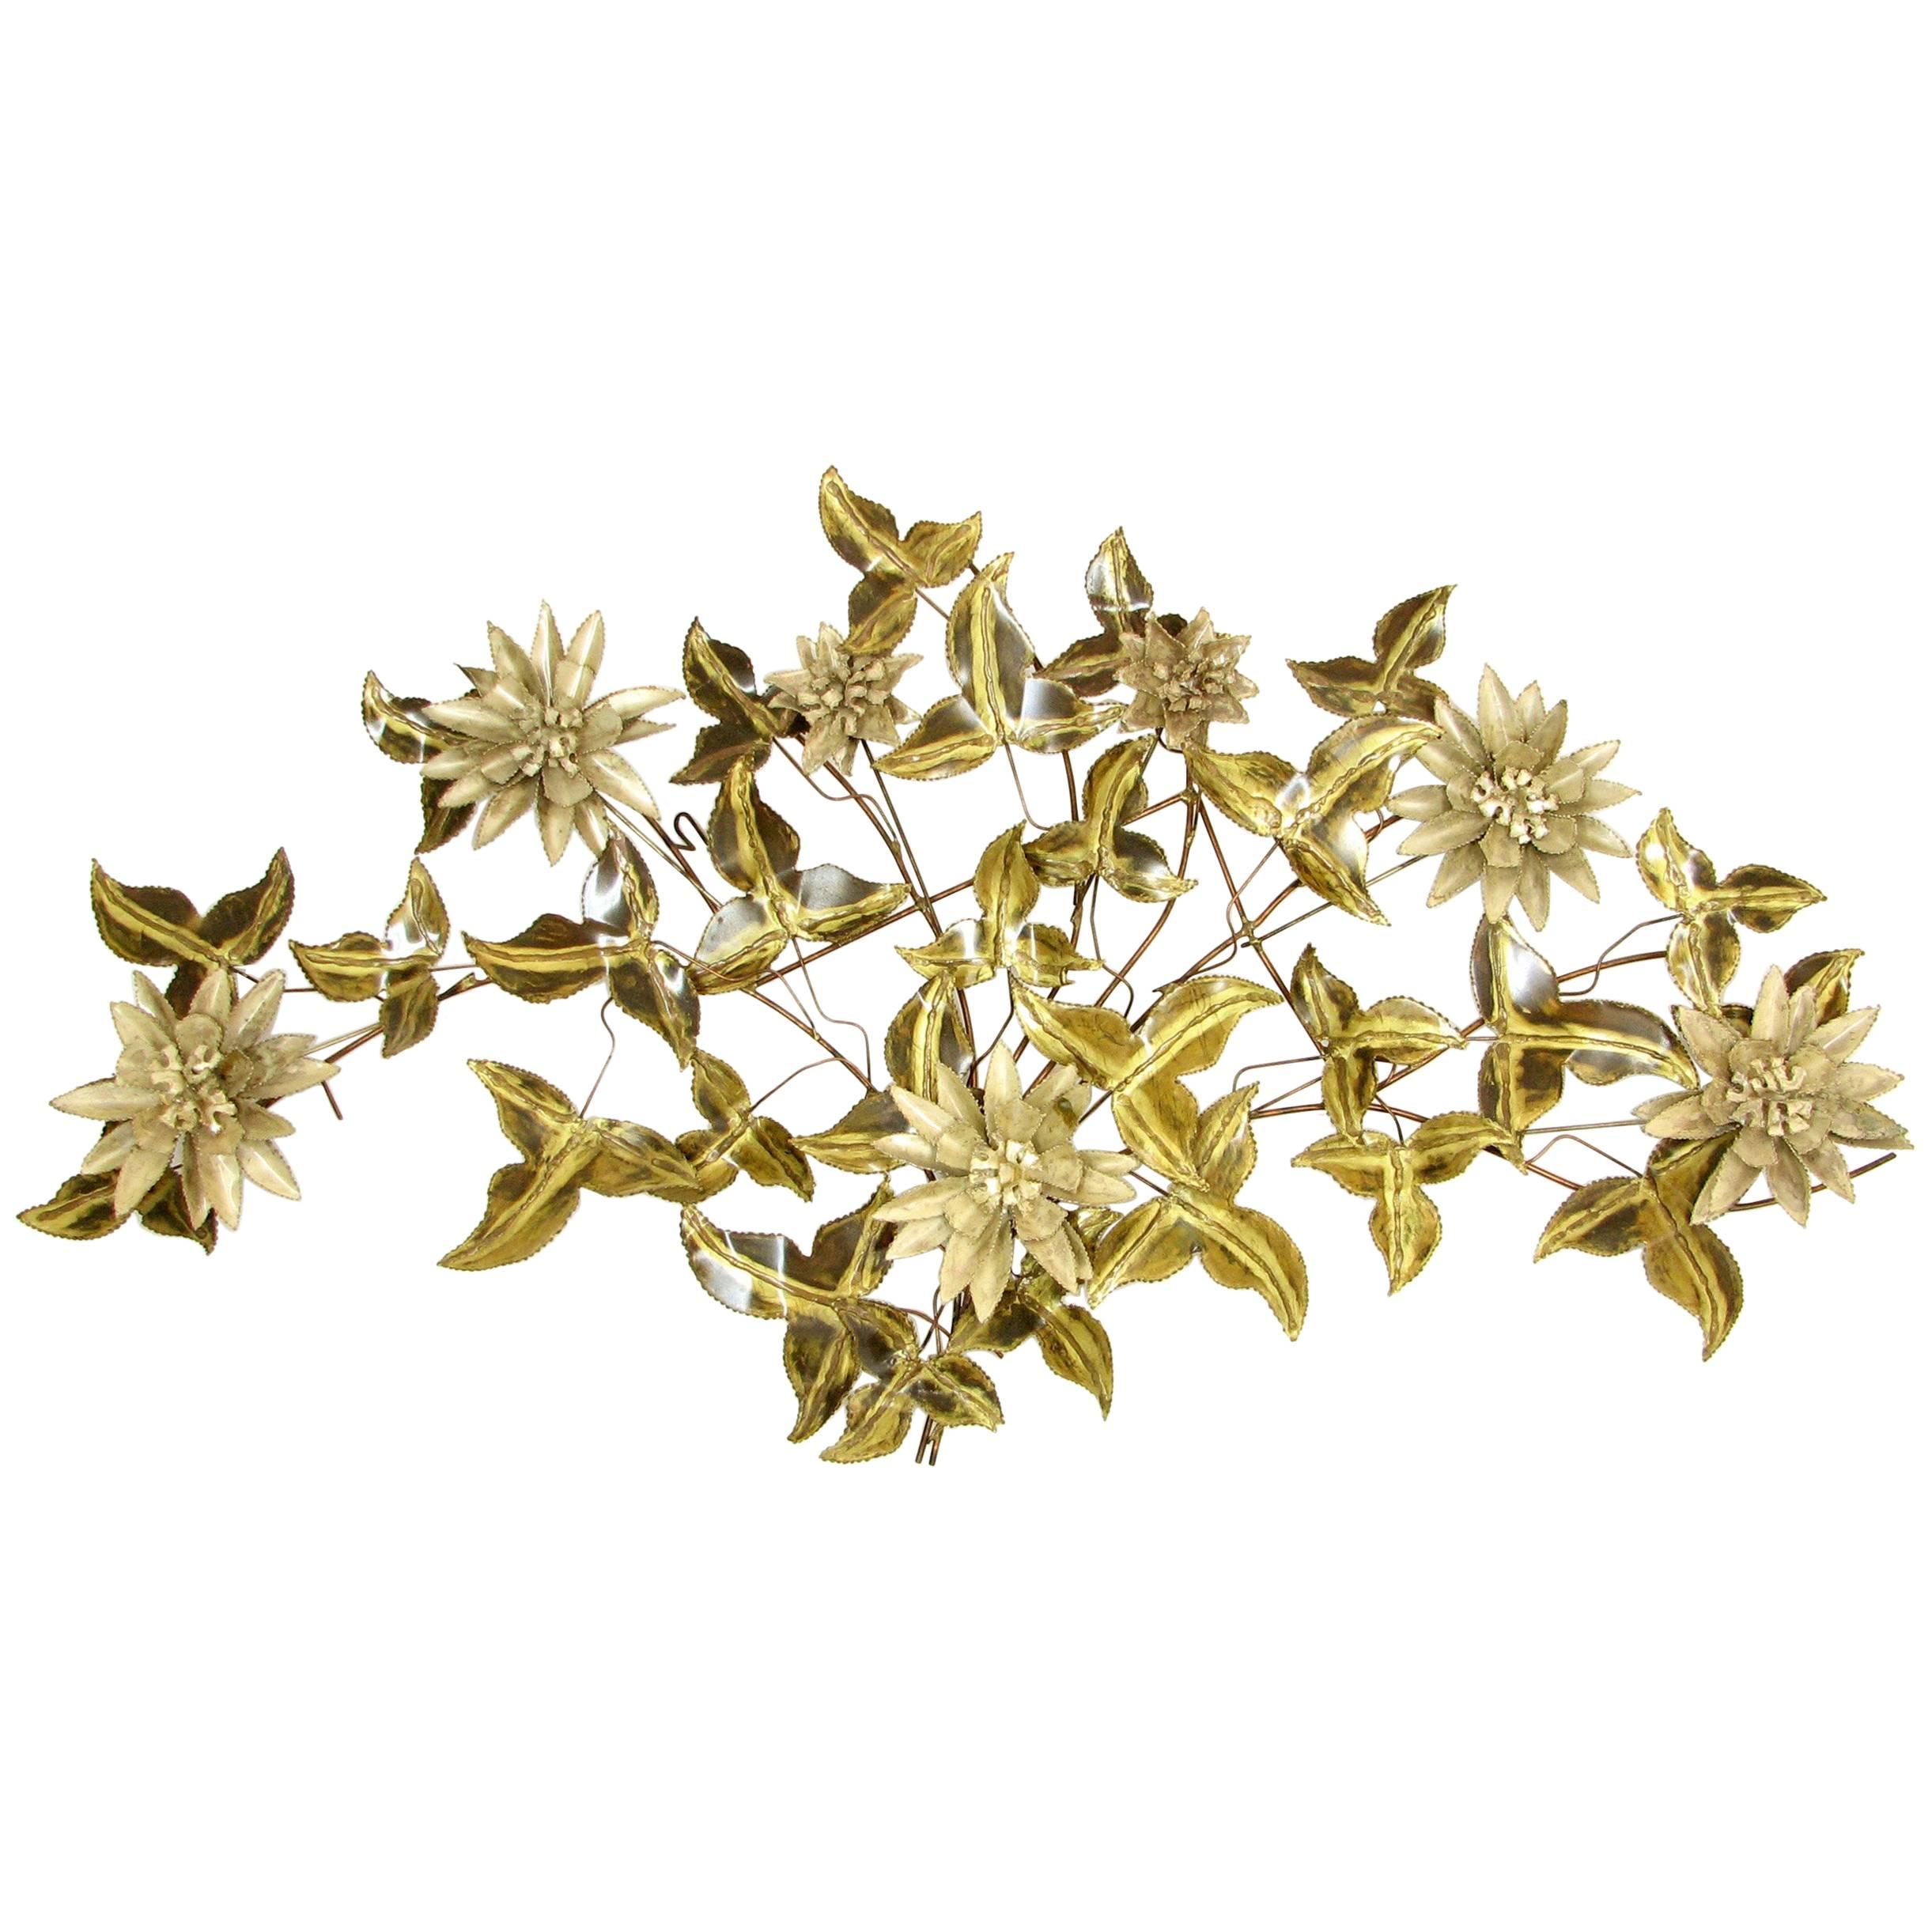 Brutalist Floral Wall Sculpture Attributed to C. Jere For Sale